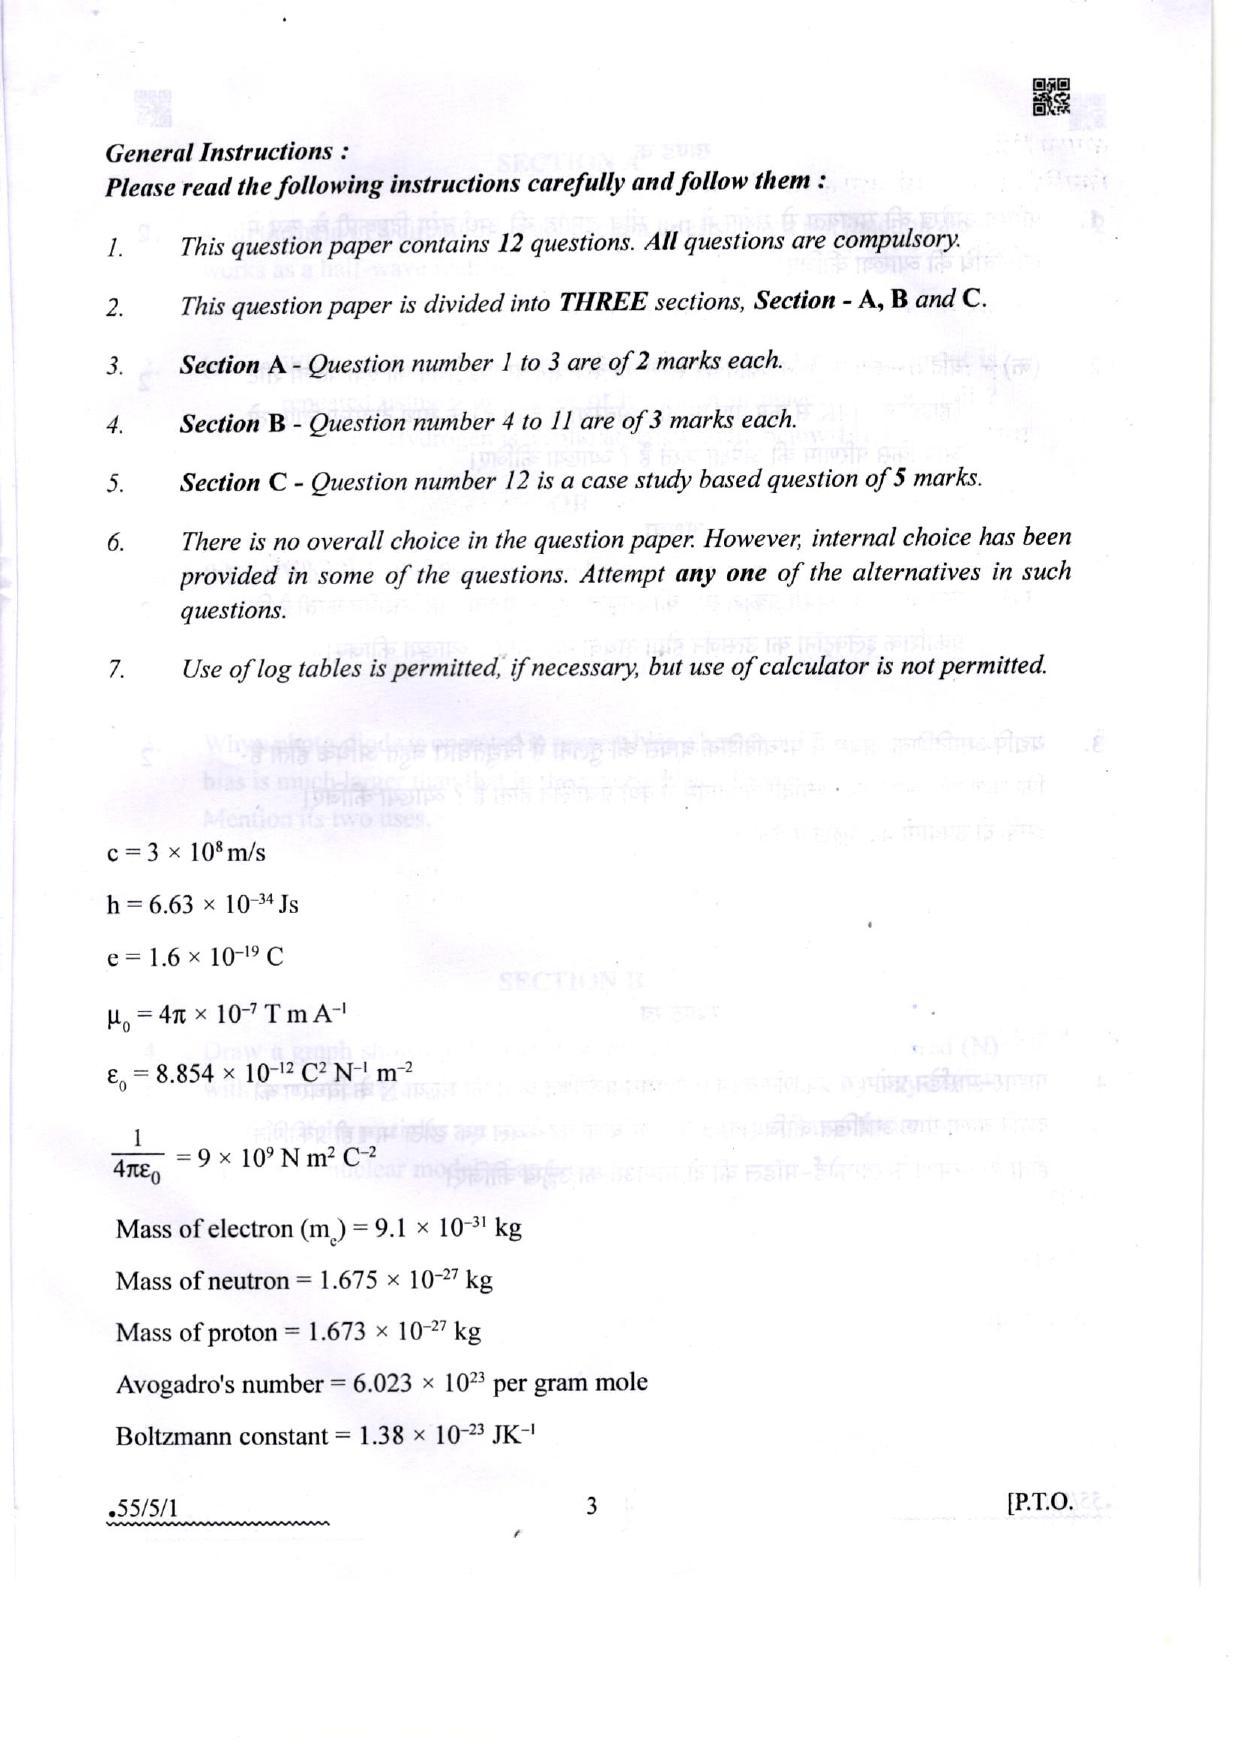 CBSE Class 12 55-5-1 Physics 2022 Question Paper - Page 3